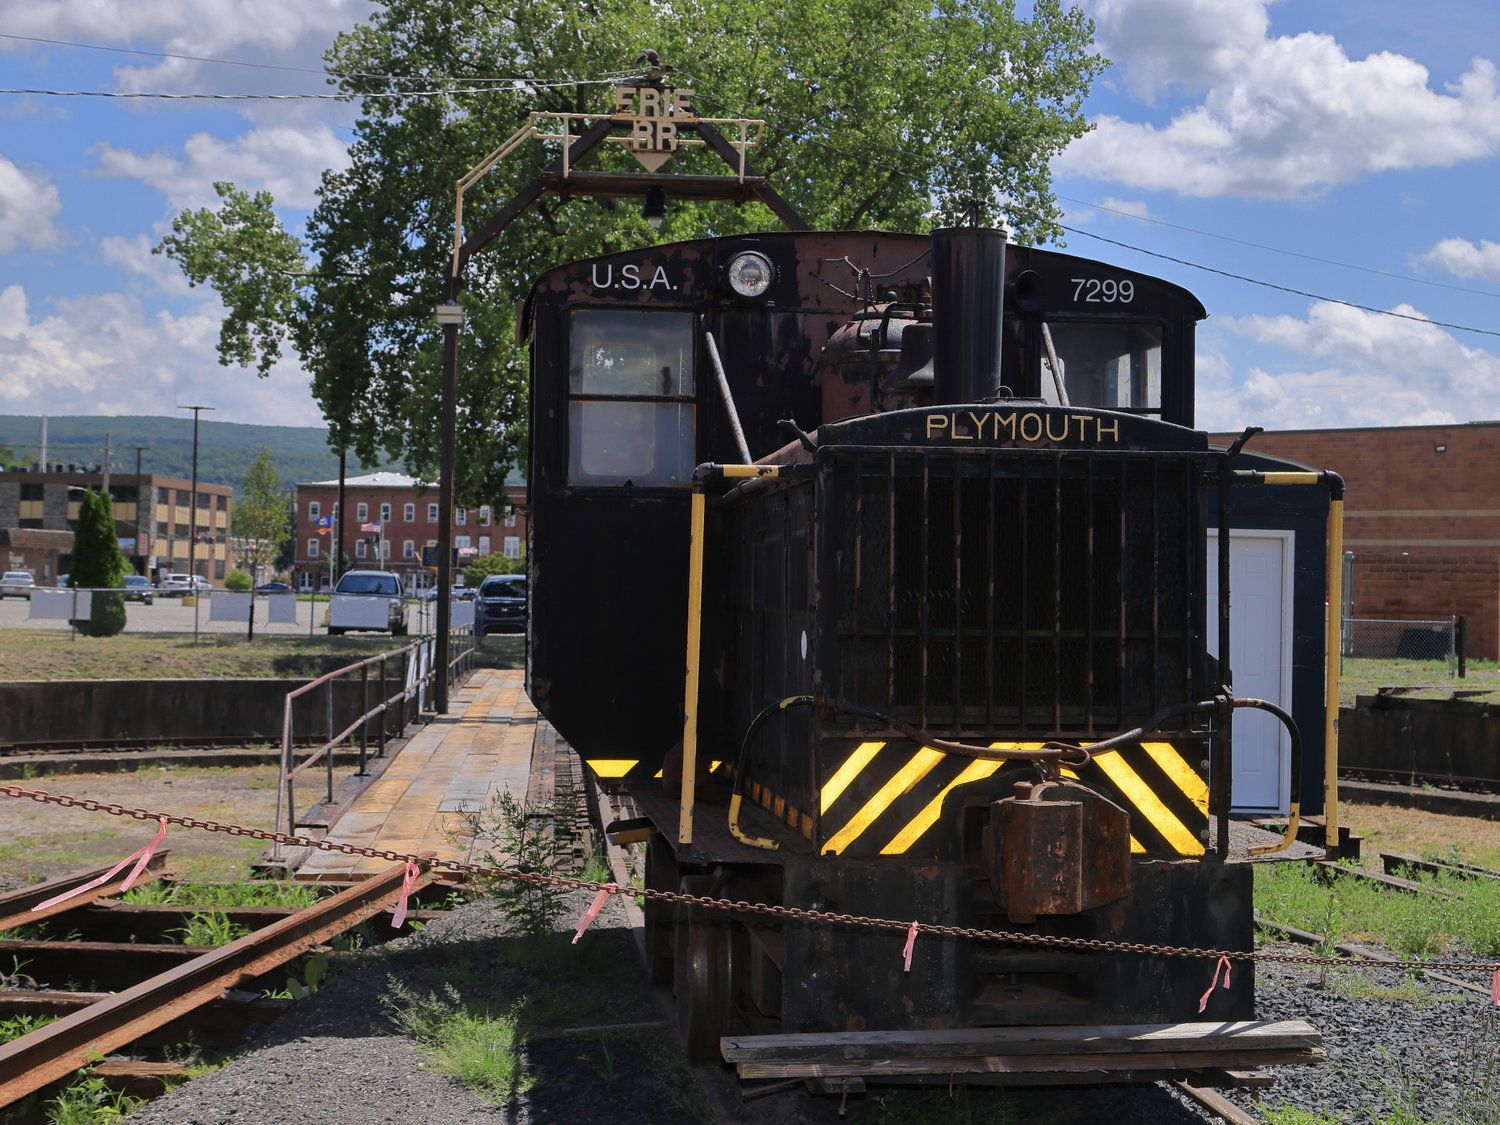 Locomotive No. 7299, seen here juxtaposed with the turntable at Port Jervis, was built by the Plymouth Locomotive Works of Plymouth, OH, a specialty manufacturer of small industrial locomotives. The diminutive 18-ton locomotive was built for the U.S. Army, and rolled off the assembly line on October 13, 1941.